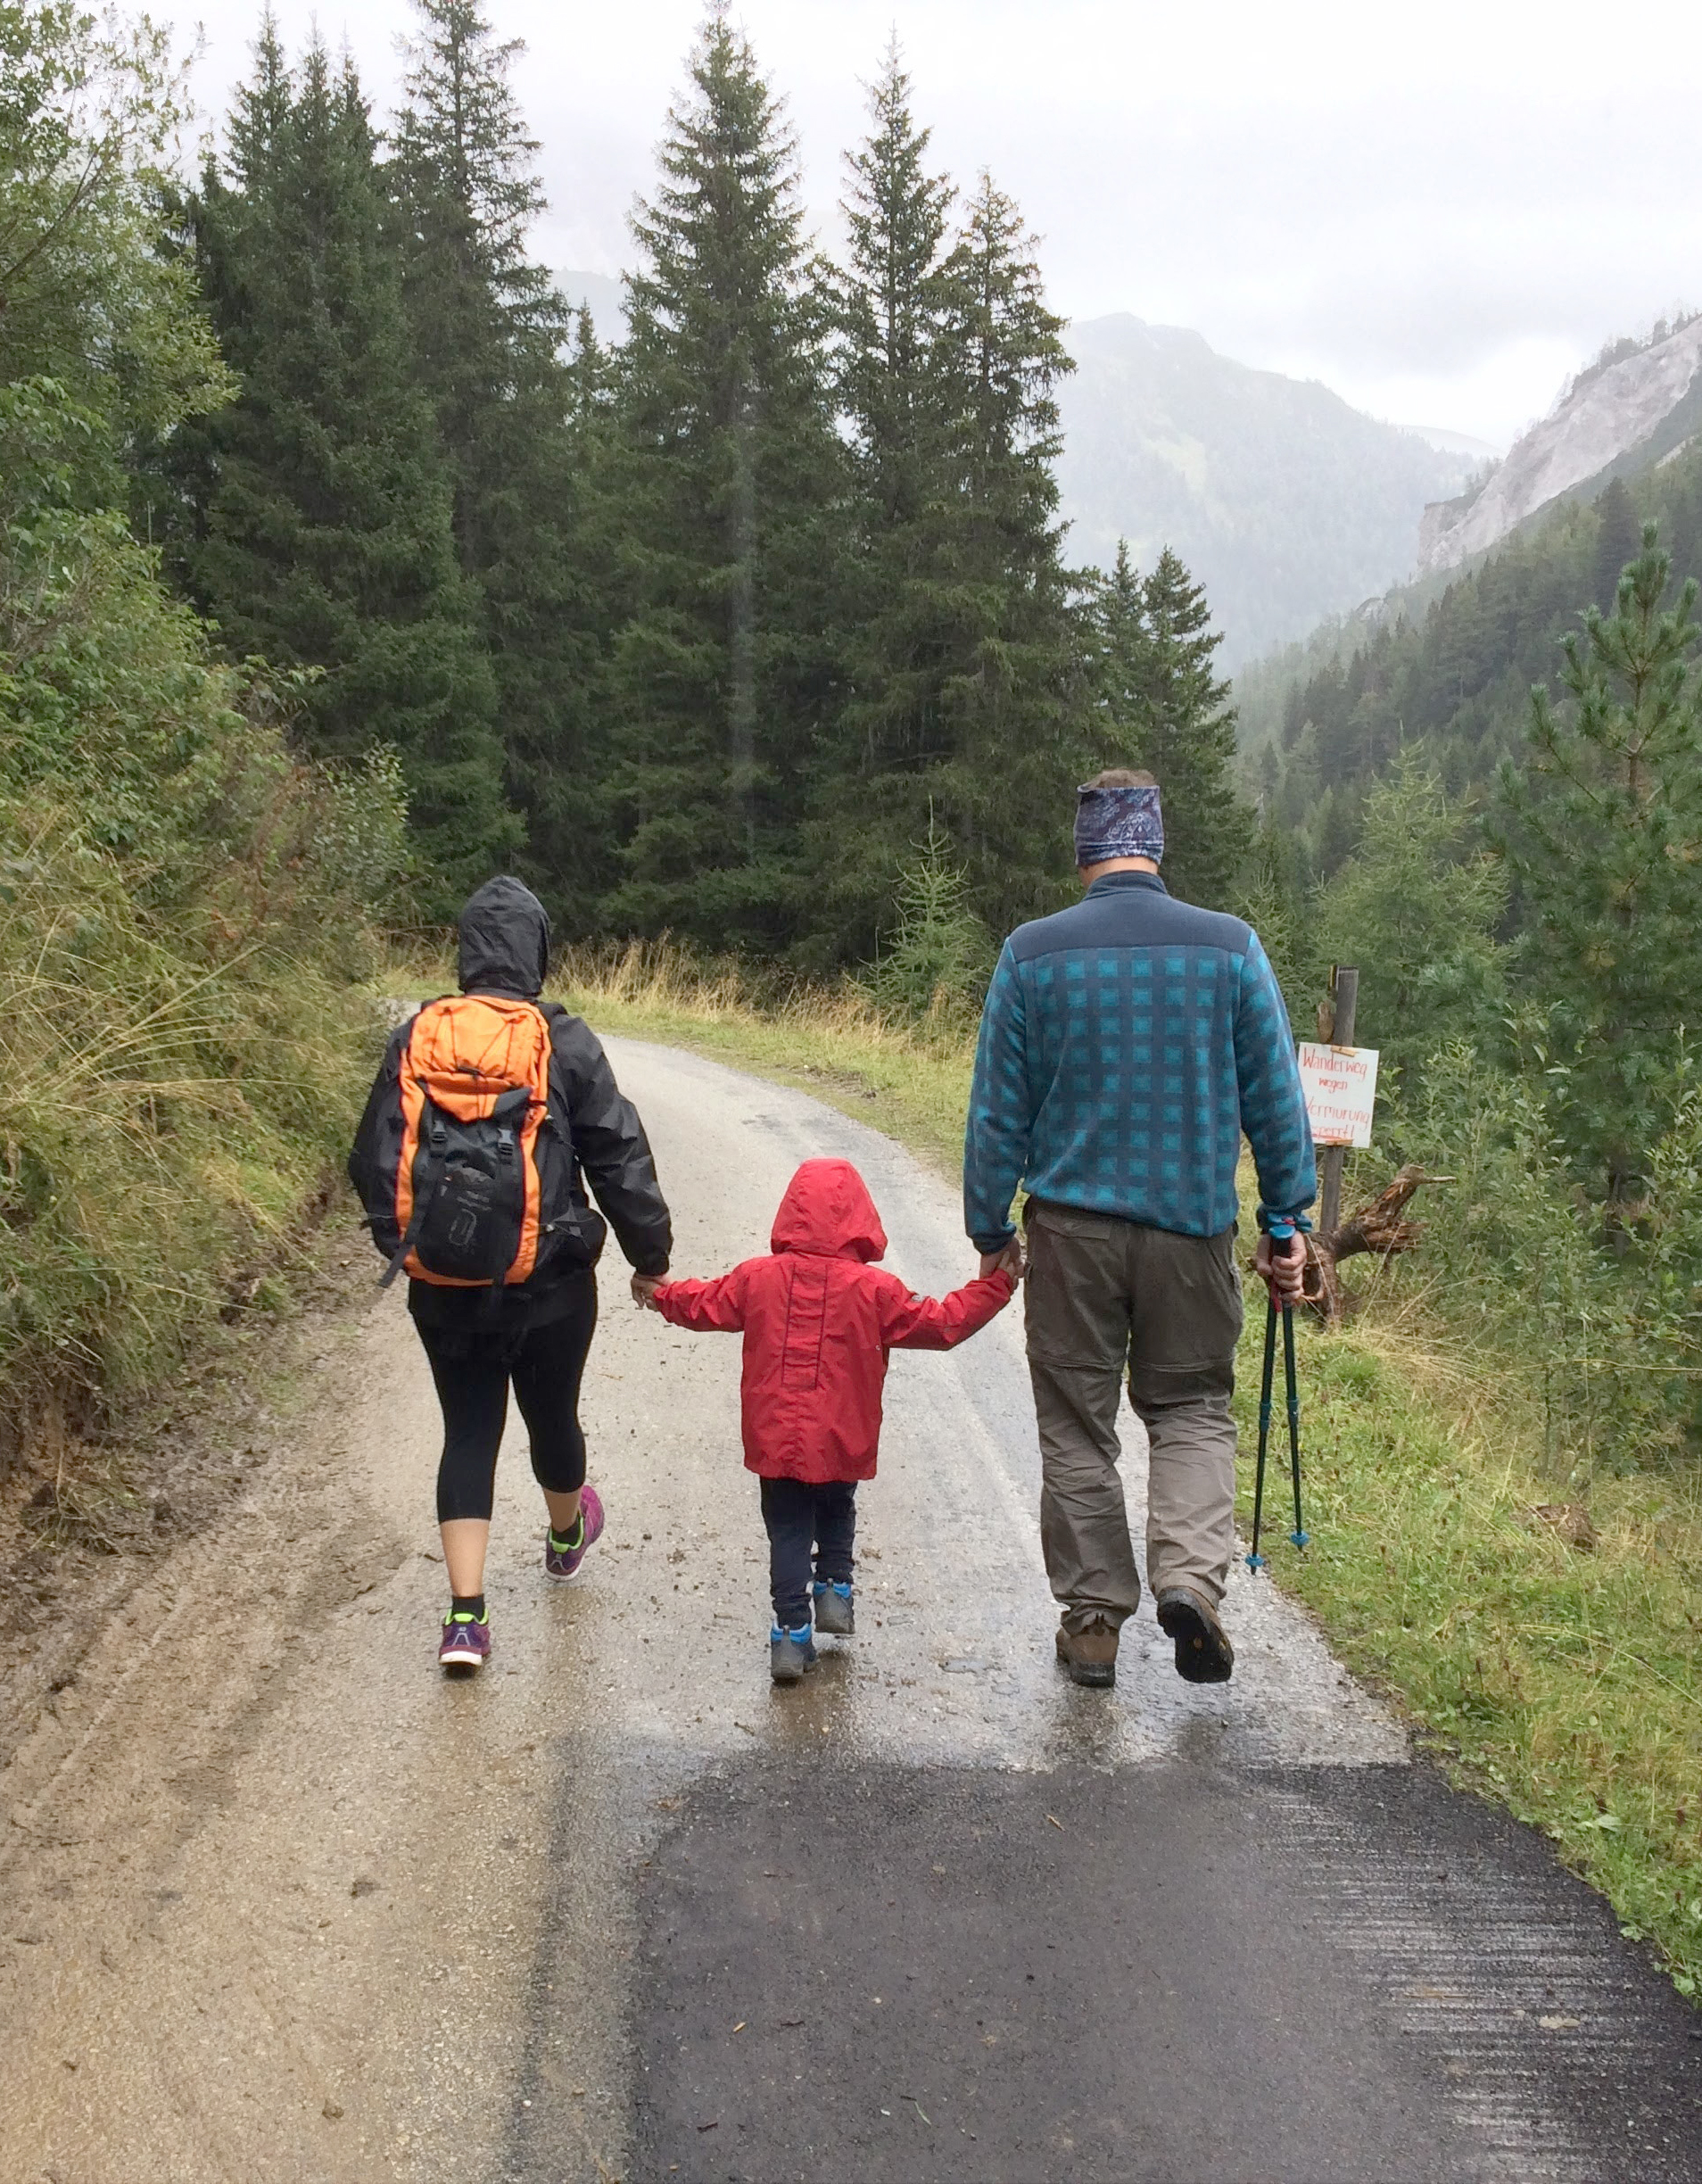 A Family Walking in the Mountains